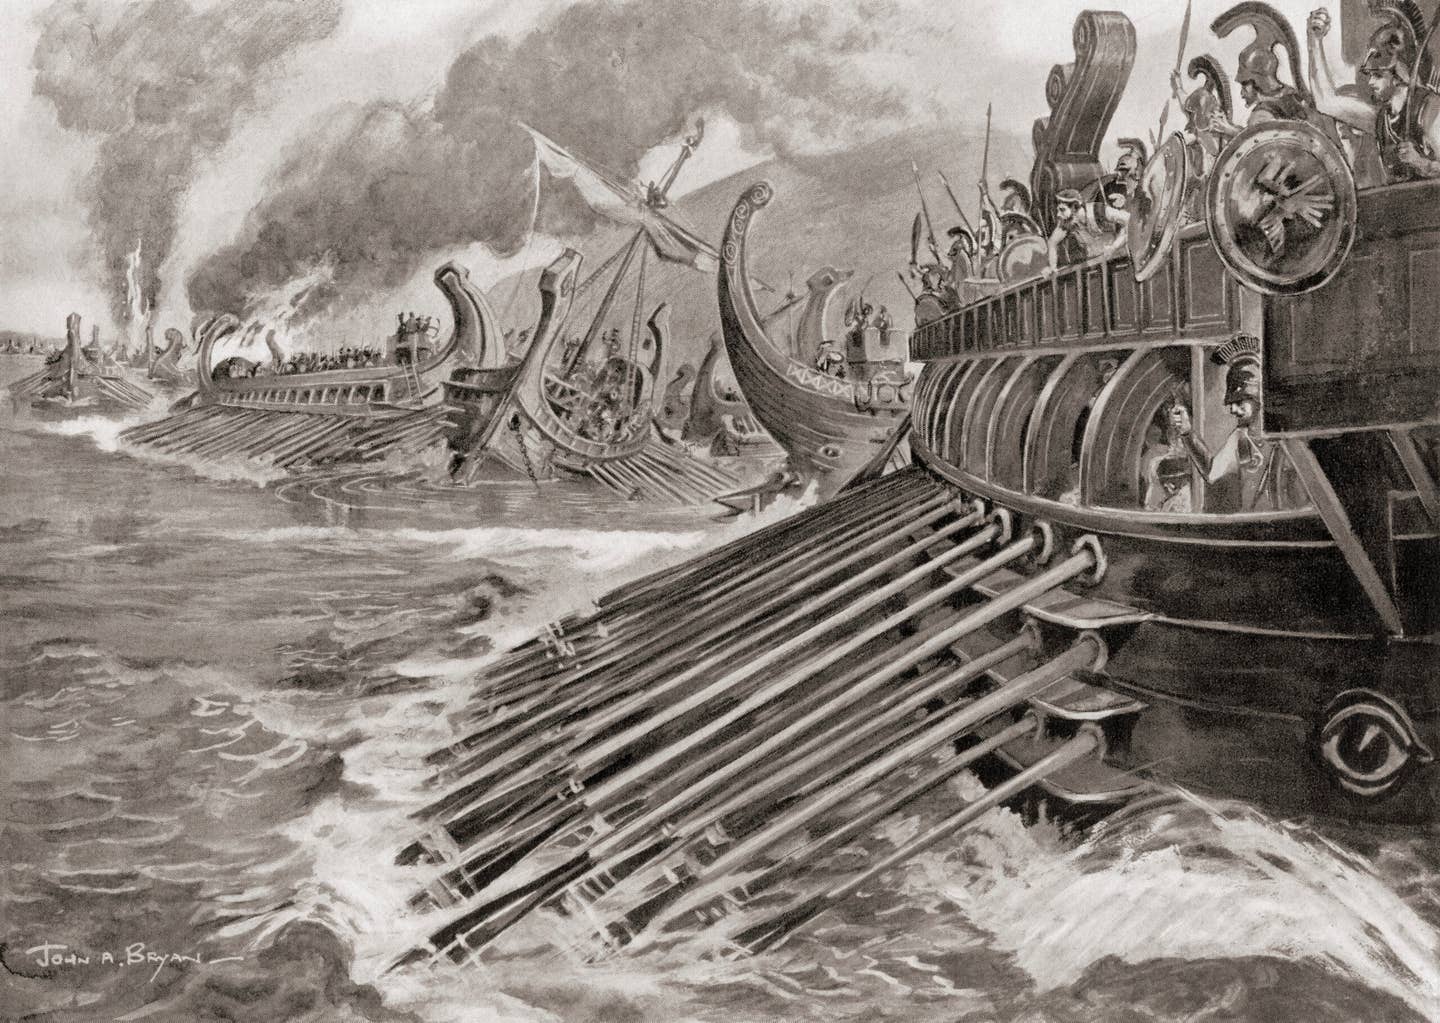 Illustration of the naval Battle of Aegospotami, Hellespont, 405 BC, during which the Spartan admiral Lysander destroyed the Athenian fleet thus ending the Peloponnesian War. <em>Universal History Archive/Universal Images Group via Getty Images</em>